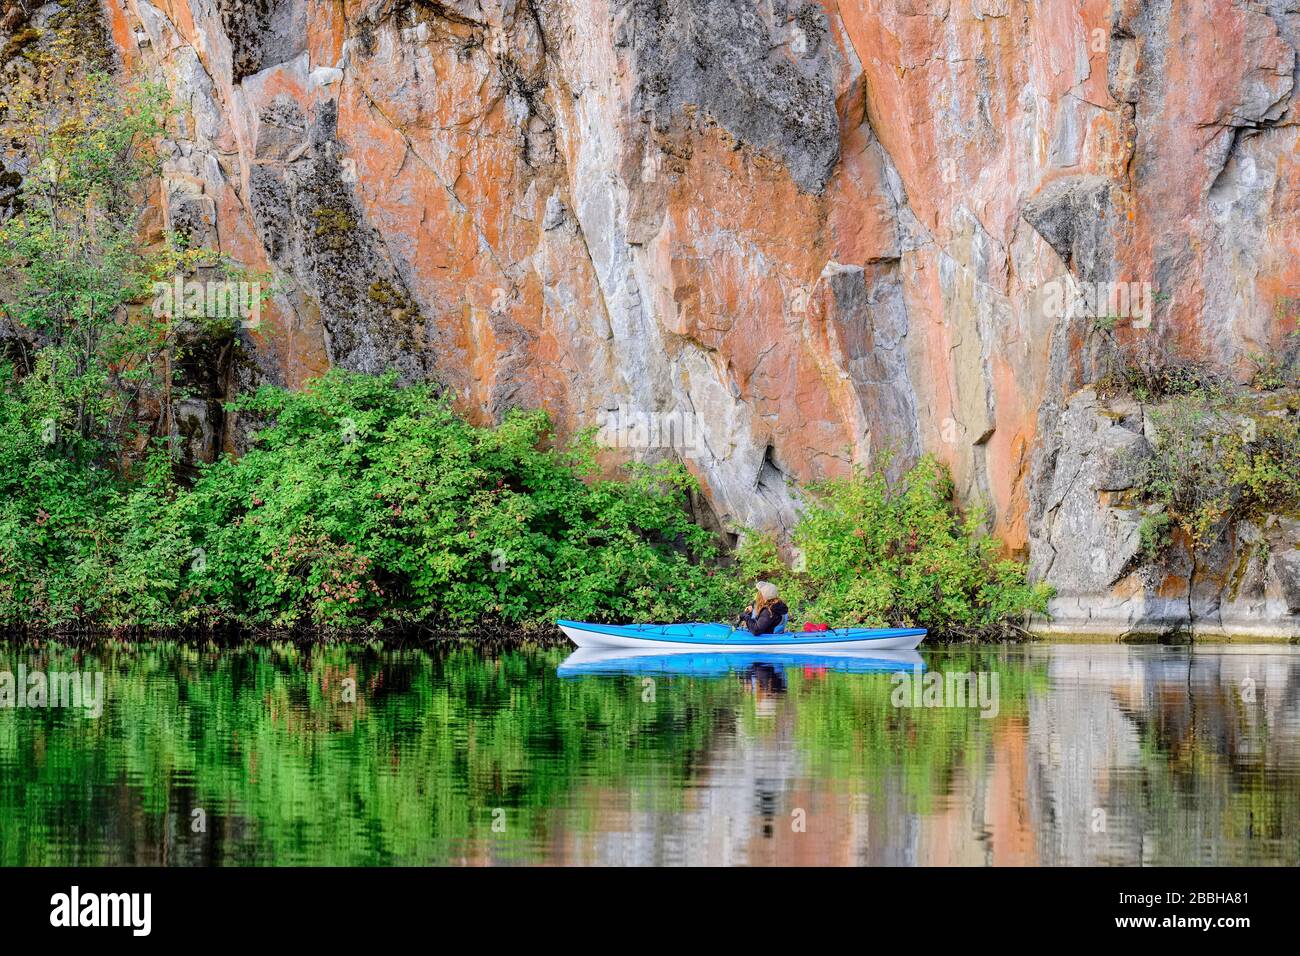 Kayaker with blue kayak looking at rock formations on Yellow Lake in the Okangan Valley of British Columbia, Canada. Stock Photo